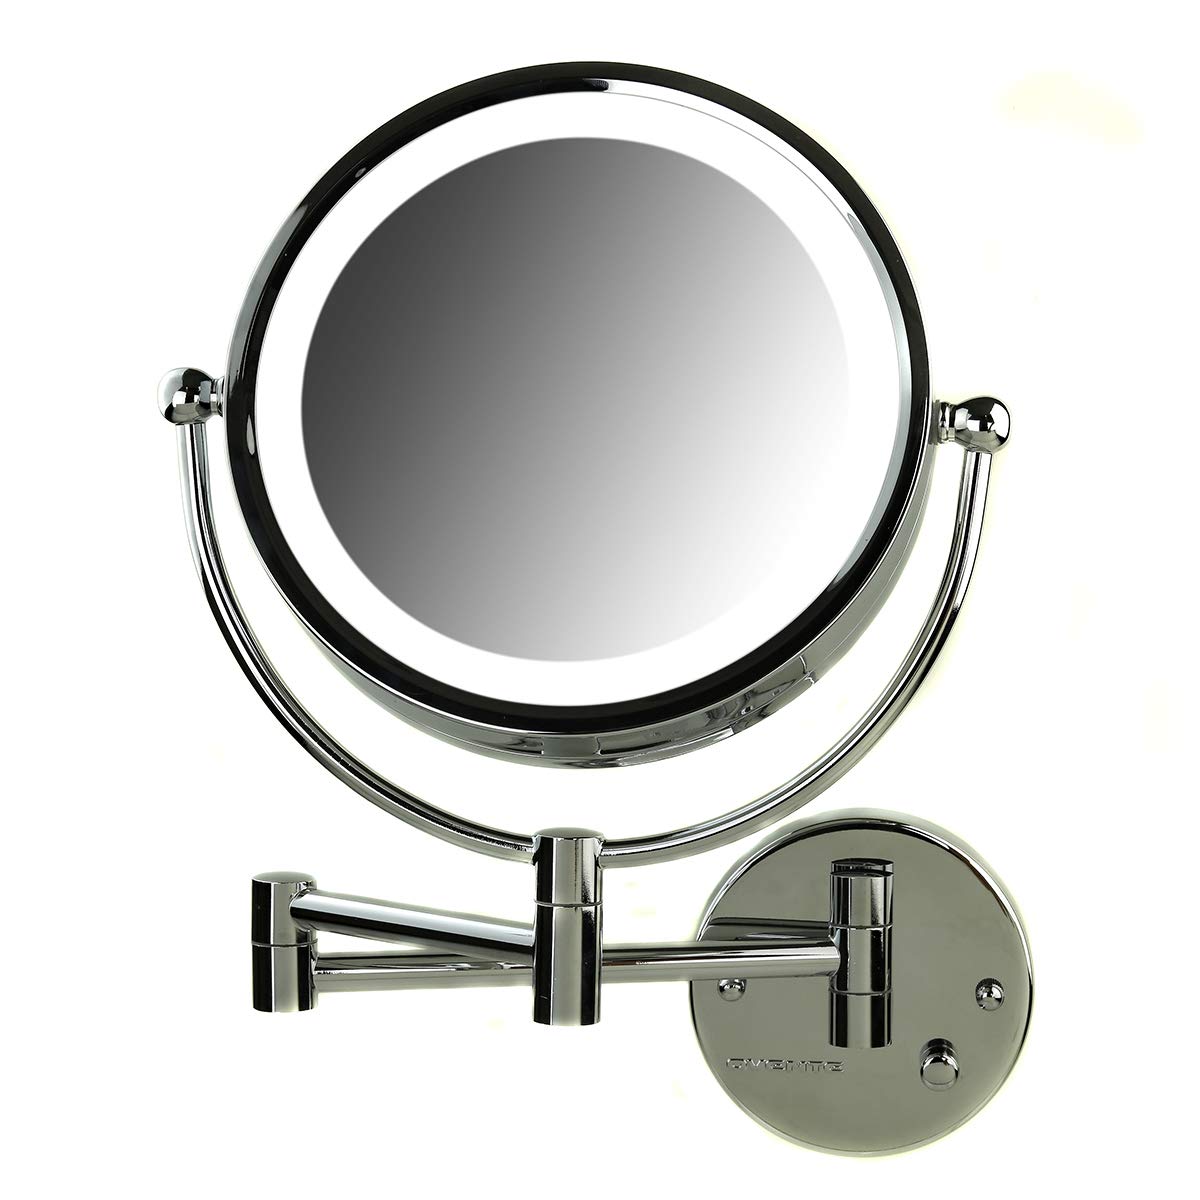 OVENTE 8.5'' Hardwired Lighted Wall Mount Makeup Mirror, 1X & 7X Magnifier, Polished Chrome MPWD3185CH1X7X - image 1 of 8